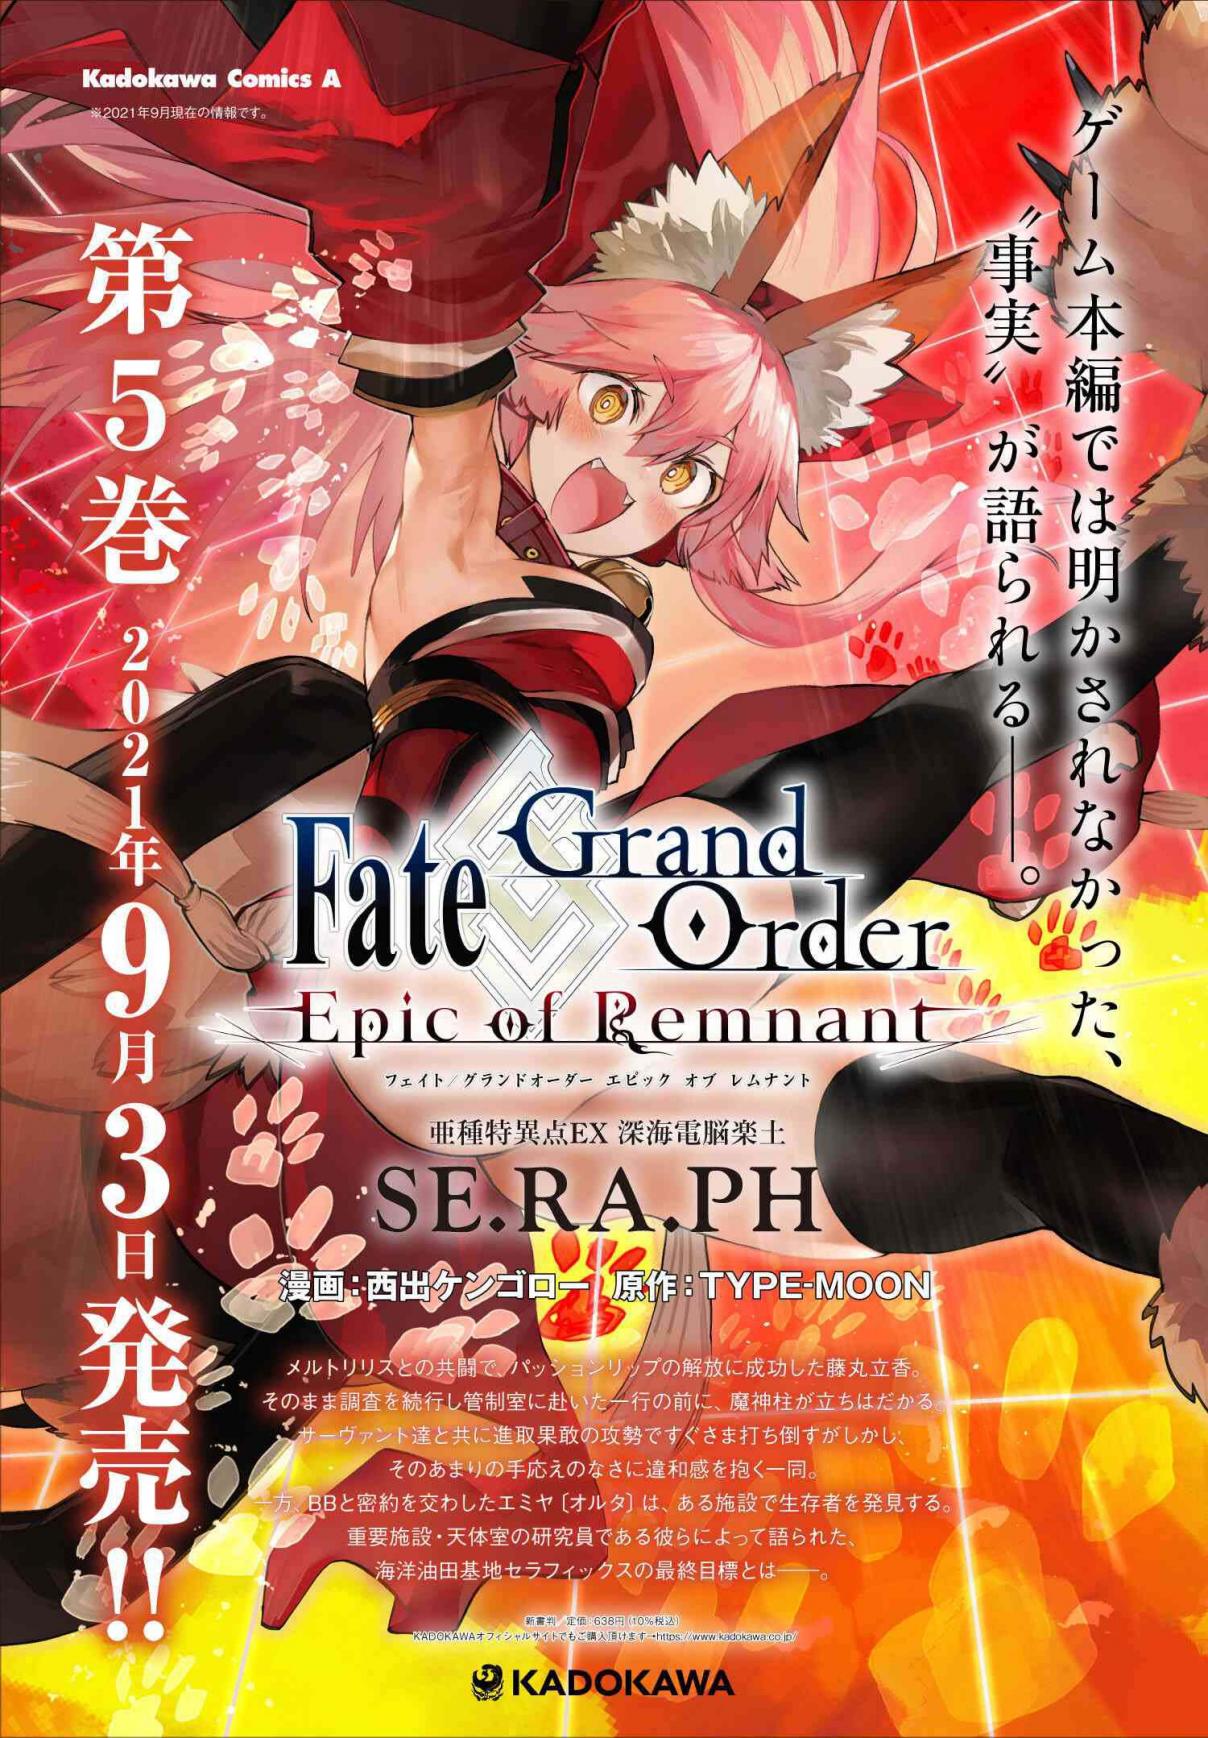 Fate/Grand Order: Epic of Remnant - Deep Sea Cyber-Paradise SE.RA.PH 25.1